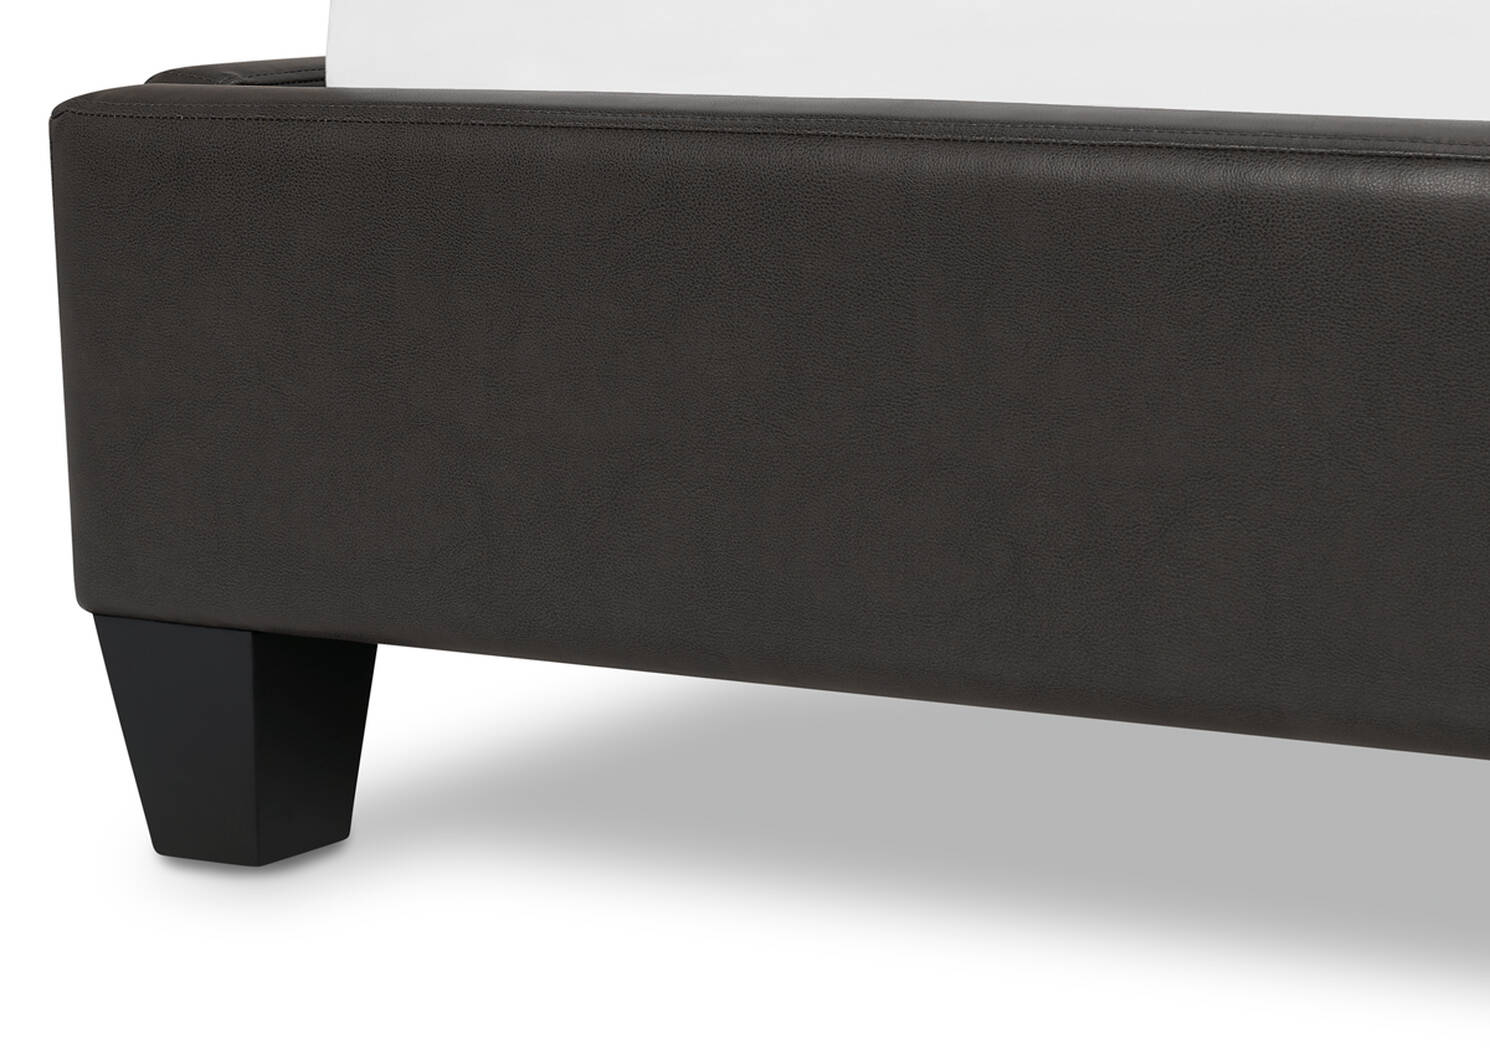 Spencer Bed -Claro Charcoal, KING